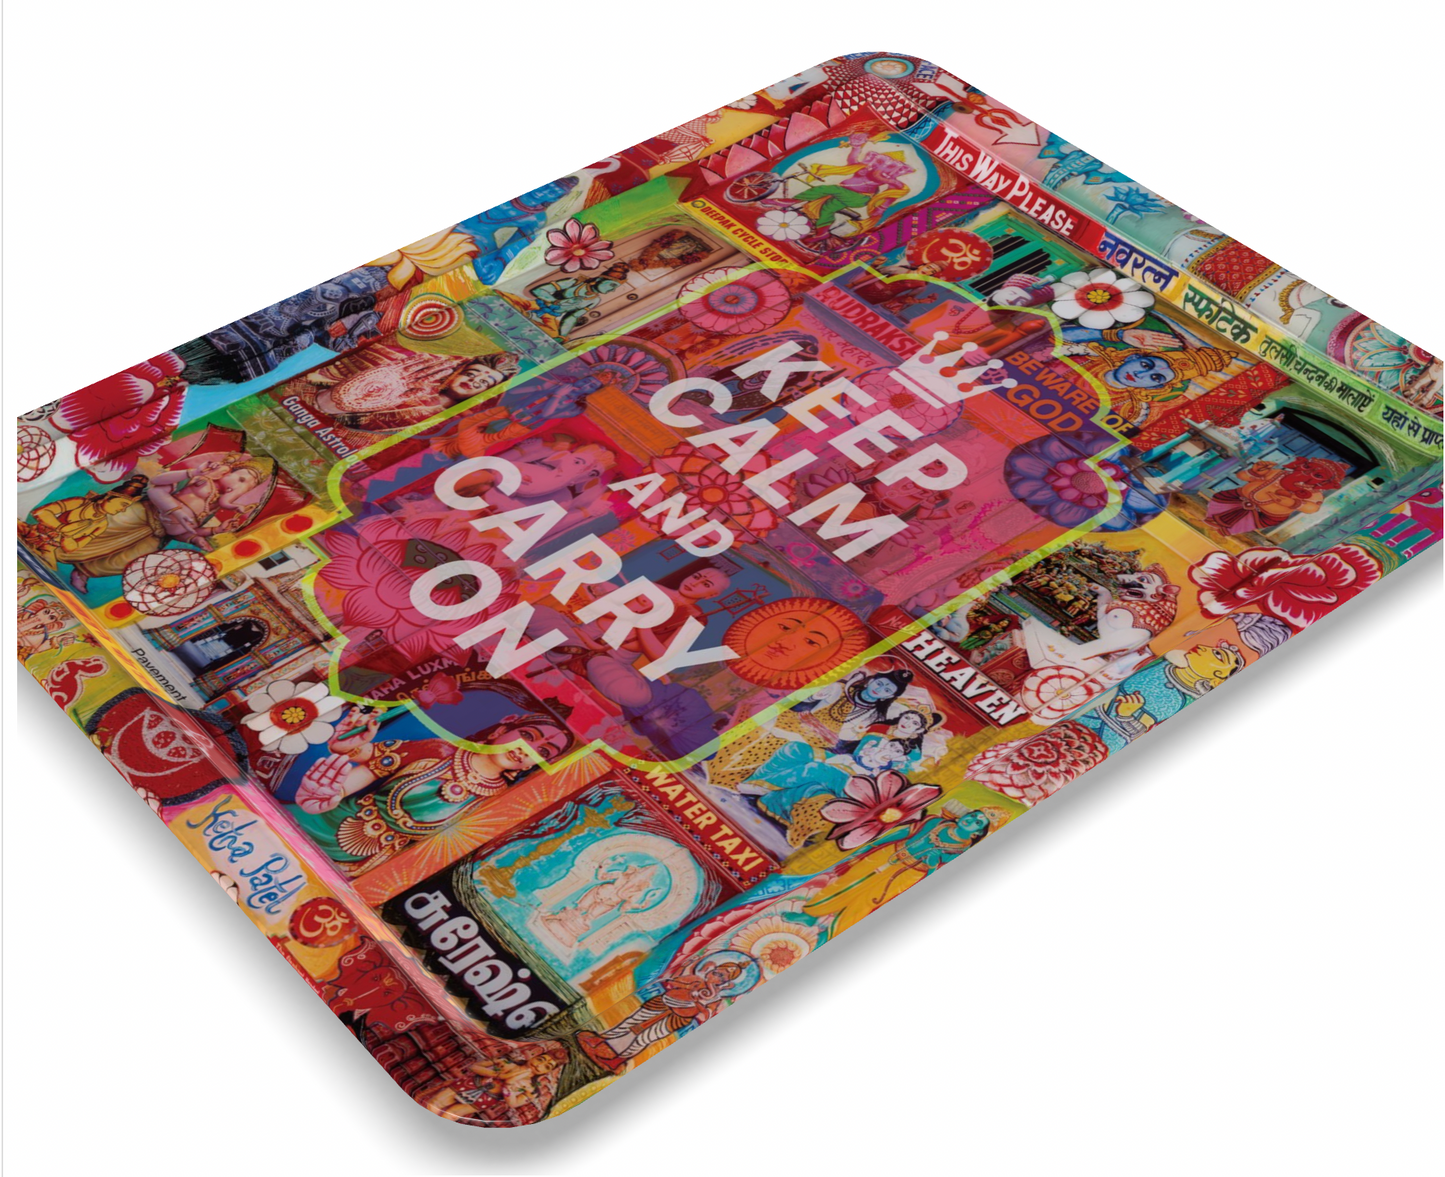 'Keep calm and carry on' Ganesh food tray